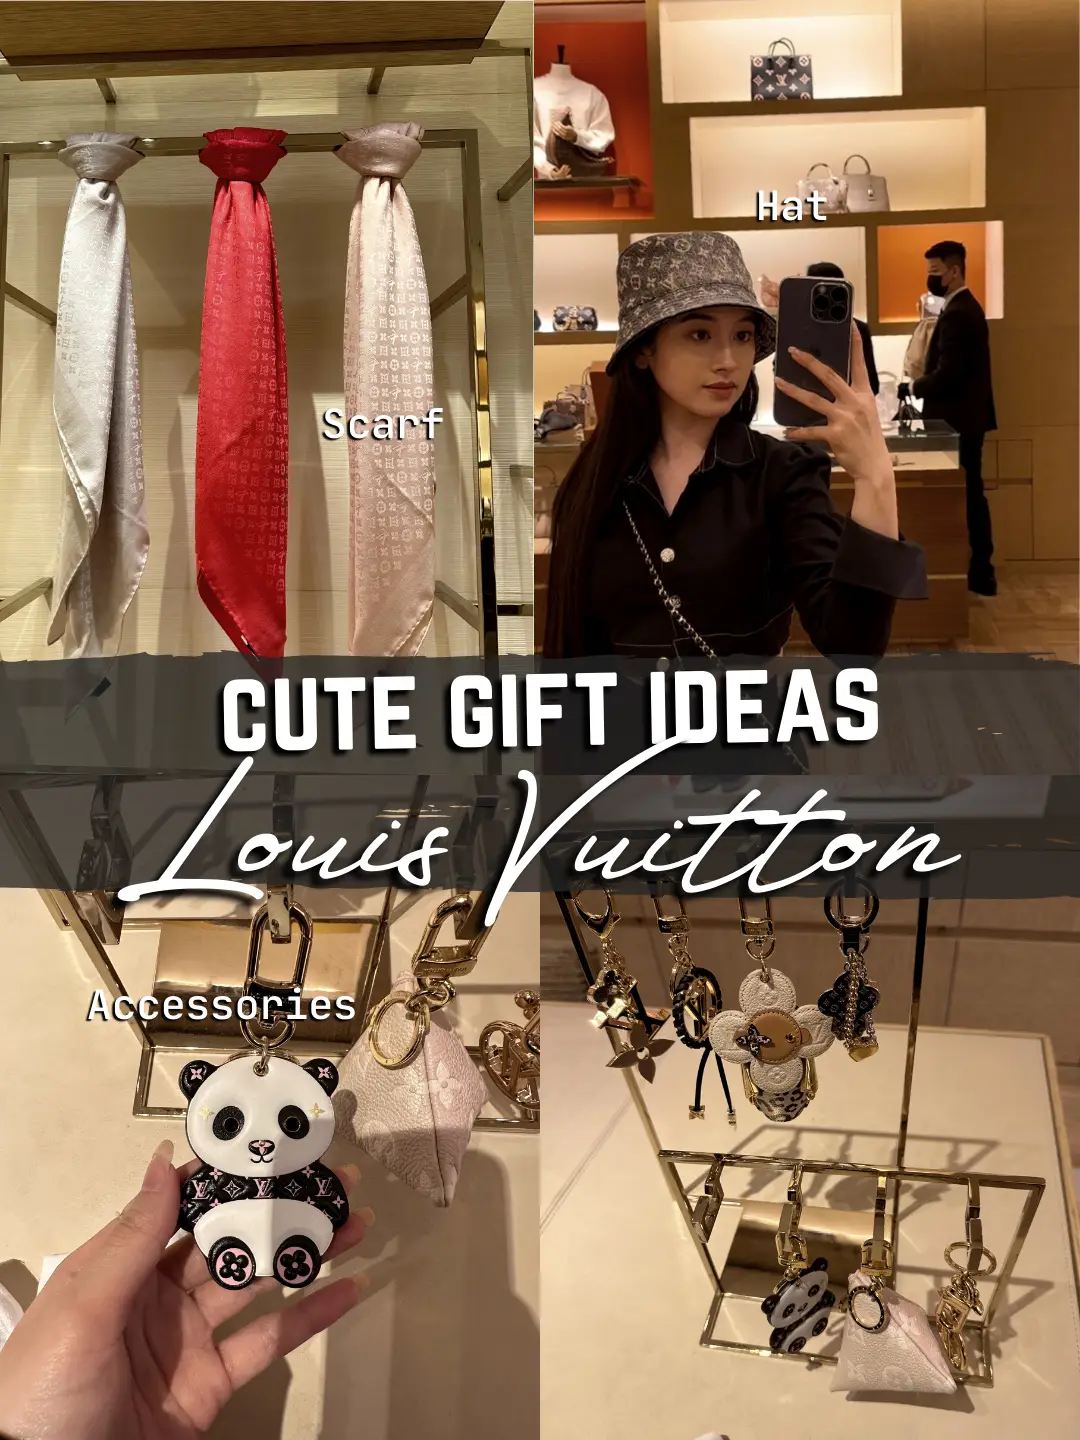 Cute Gift Ideas by Louis Vuitton✨💖, Gallery posted by Regienashael